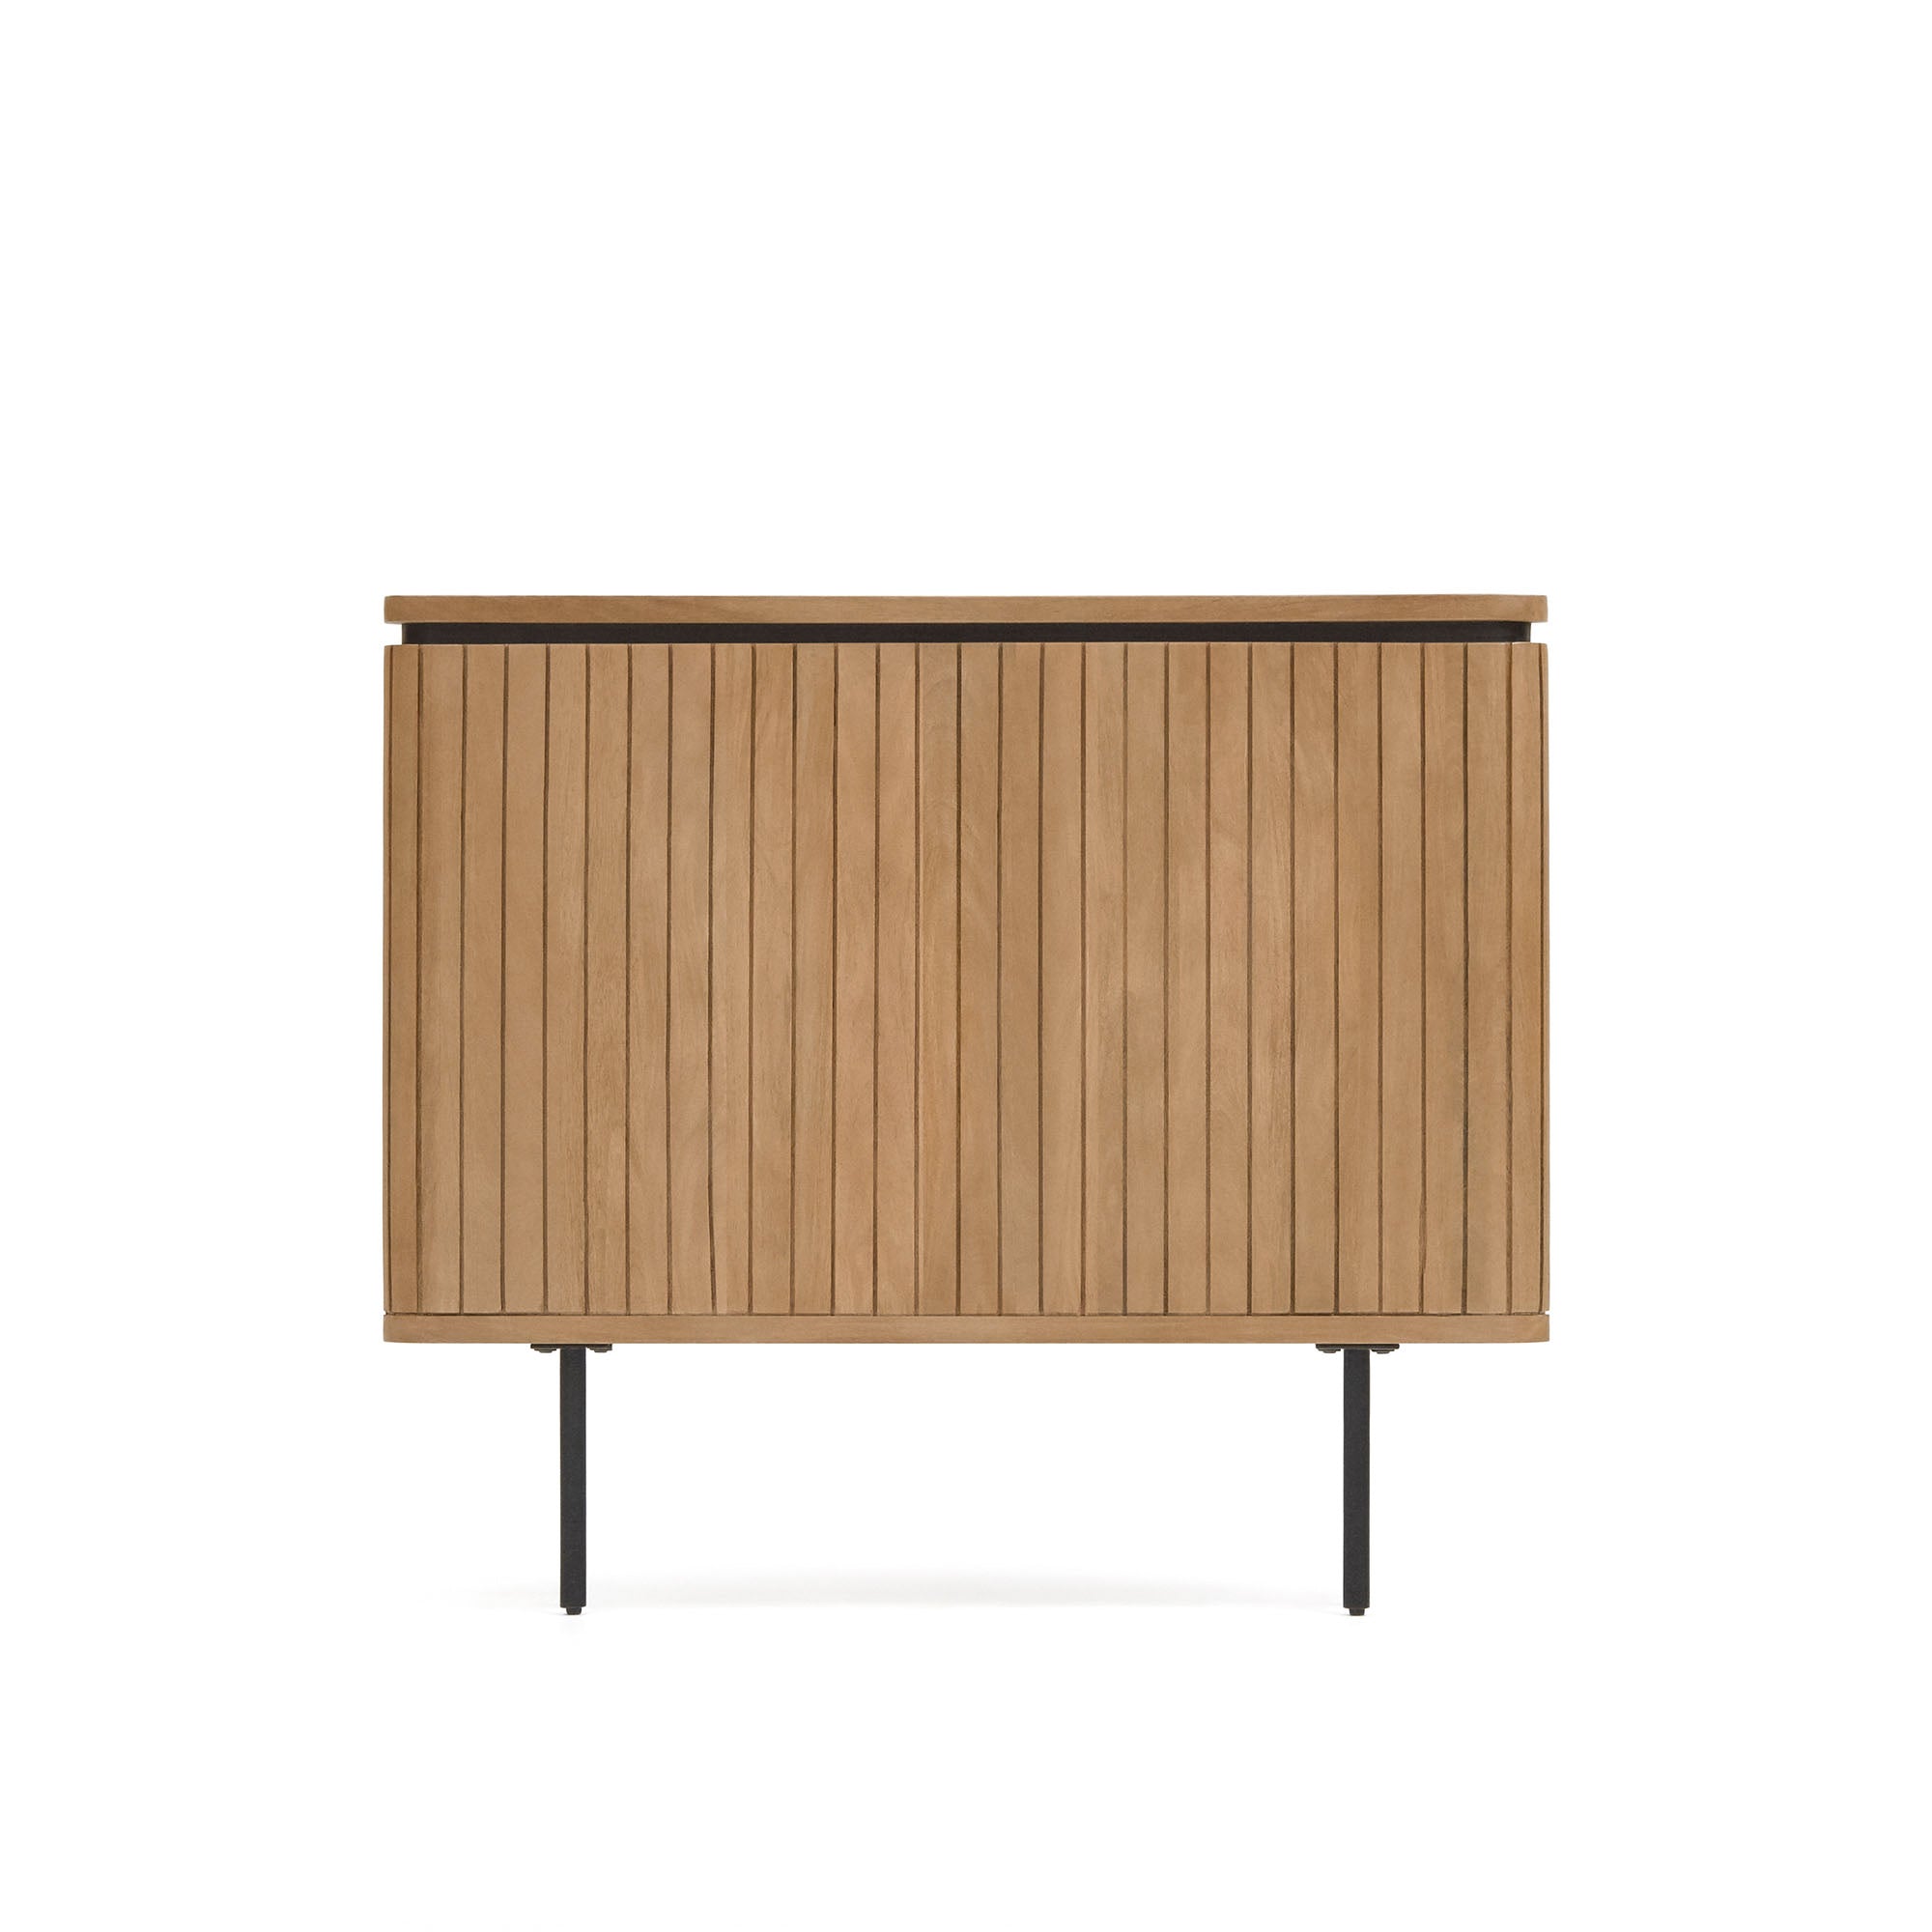 Licia solid mango wood and metal headboard with a black finish, for 90 cm beds